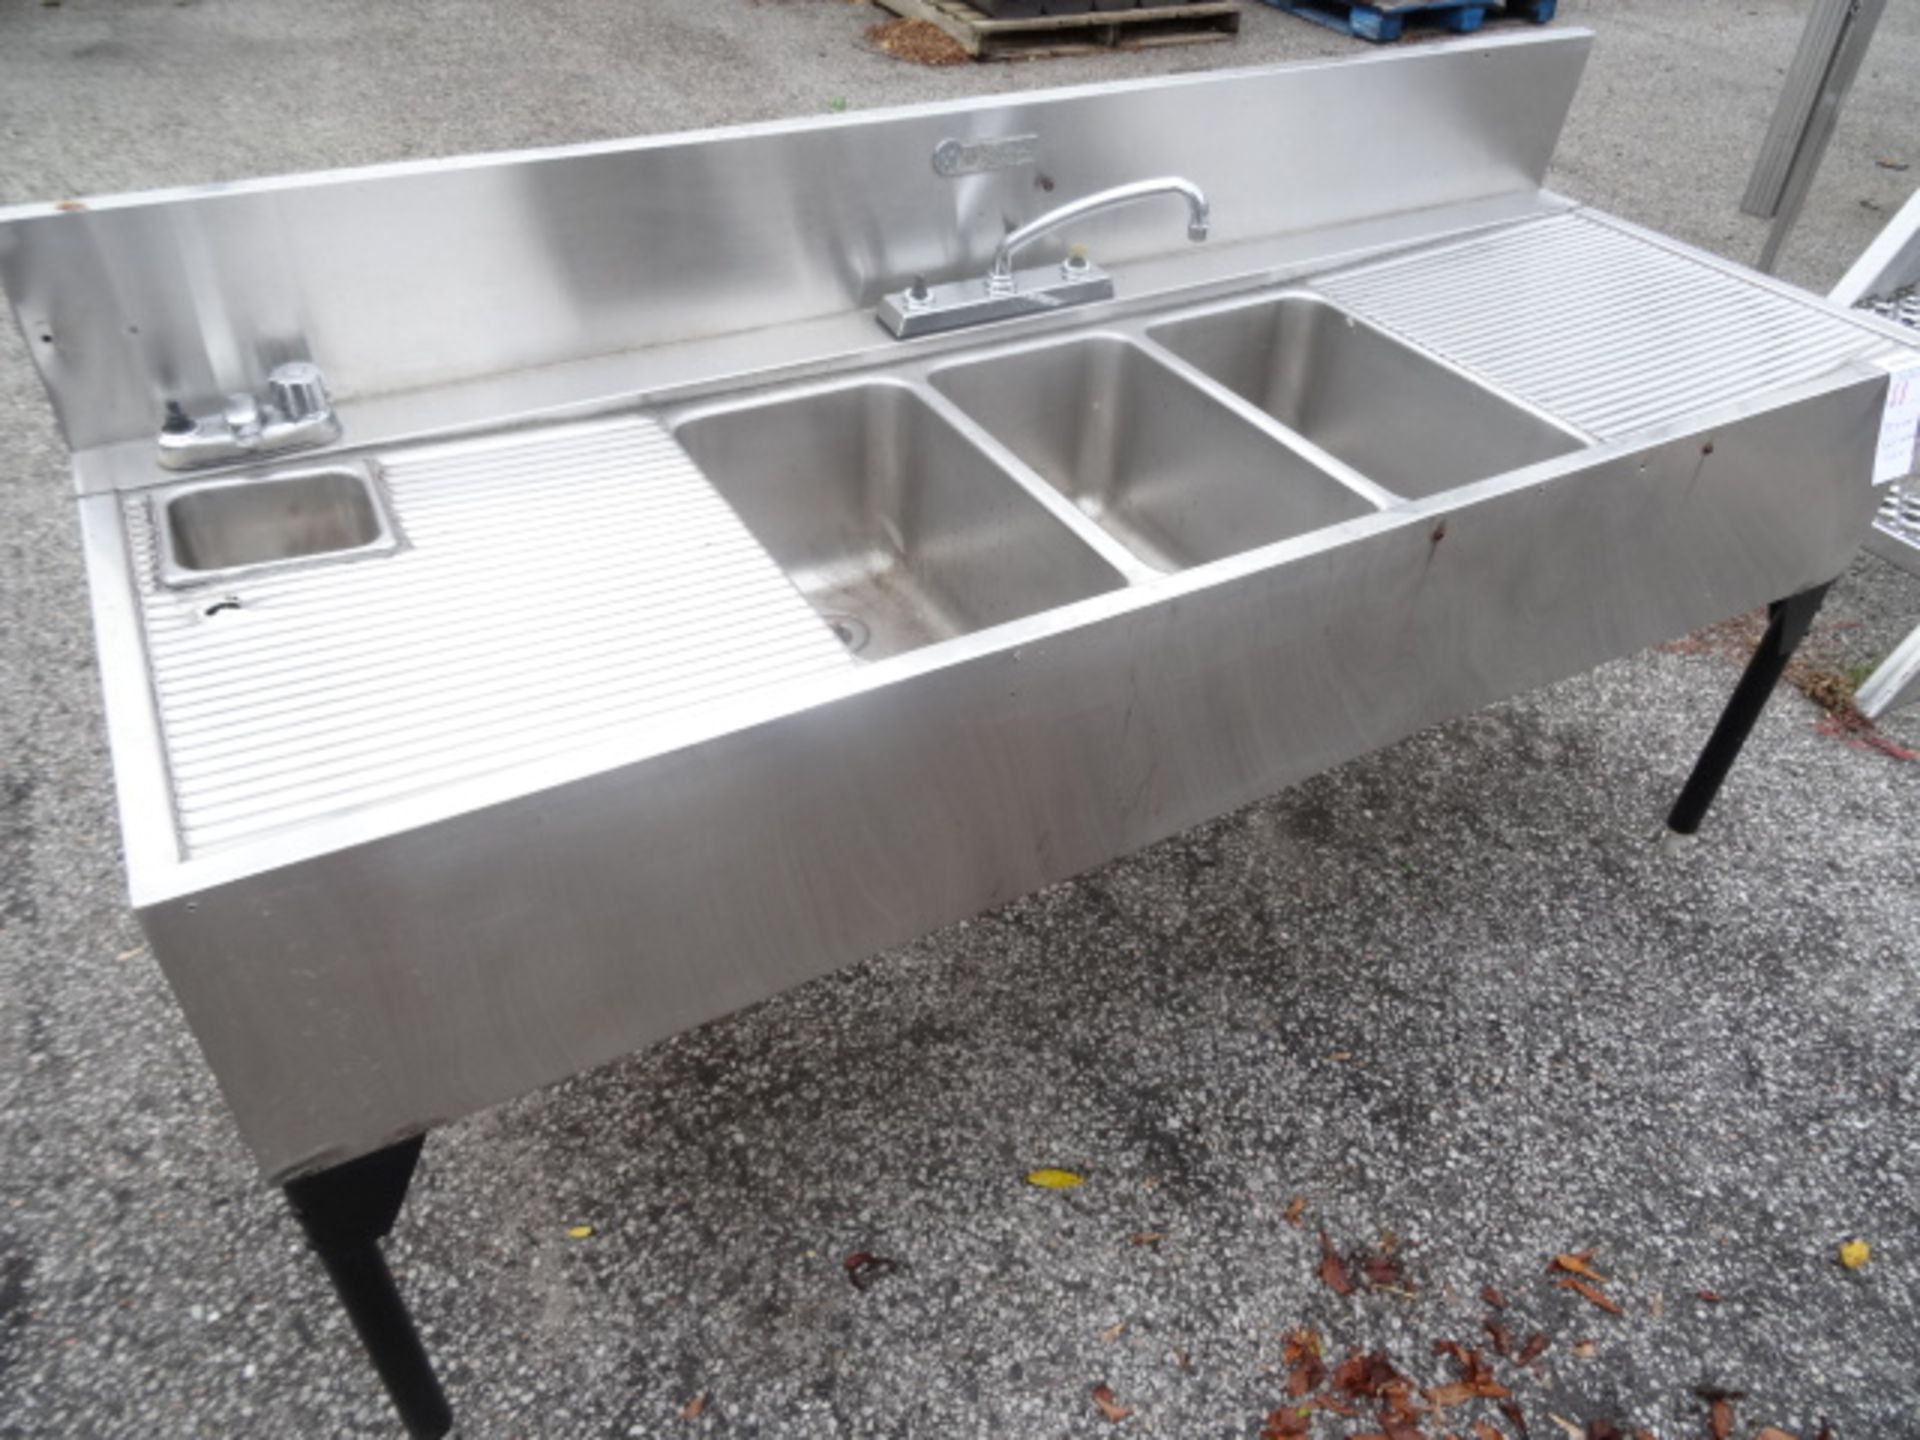 1x, 72" x 24" 3 Well Cocktail Sink - Image 3 of 4